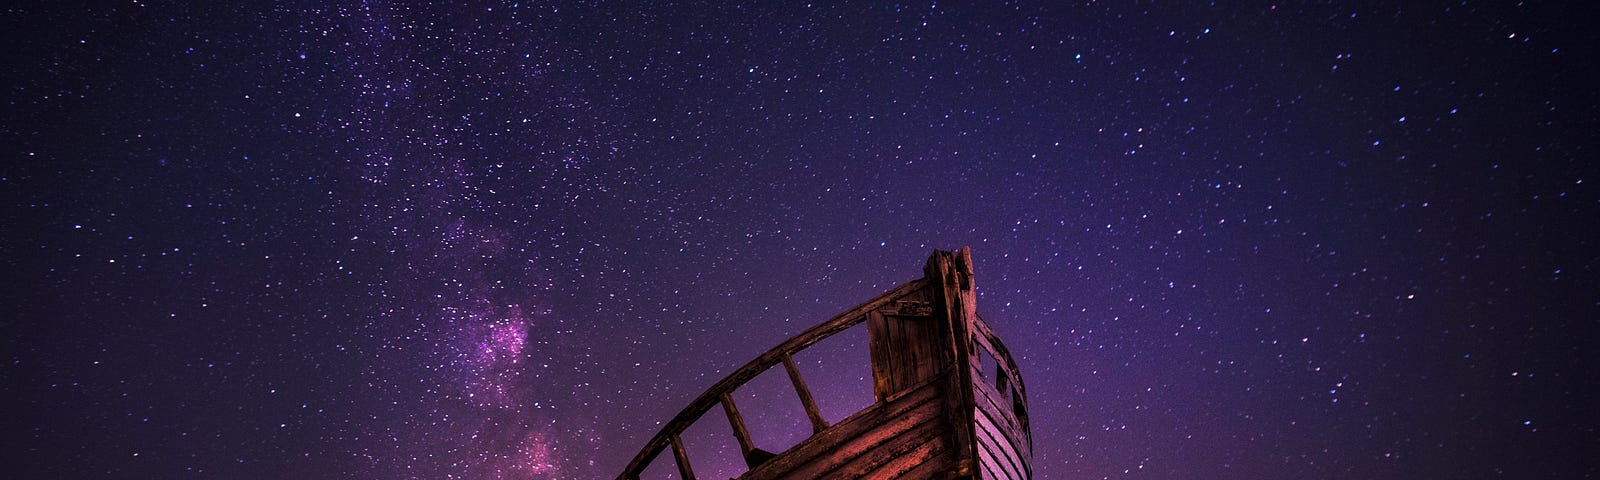 A wooden wreck of a boat under a purple starry sky.